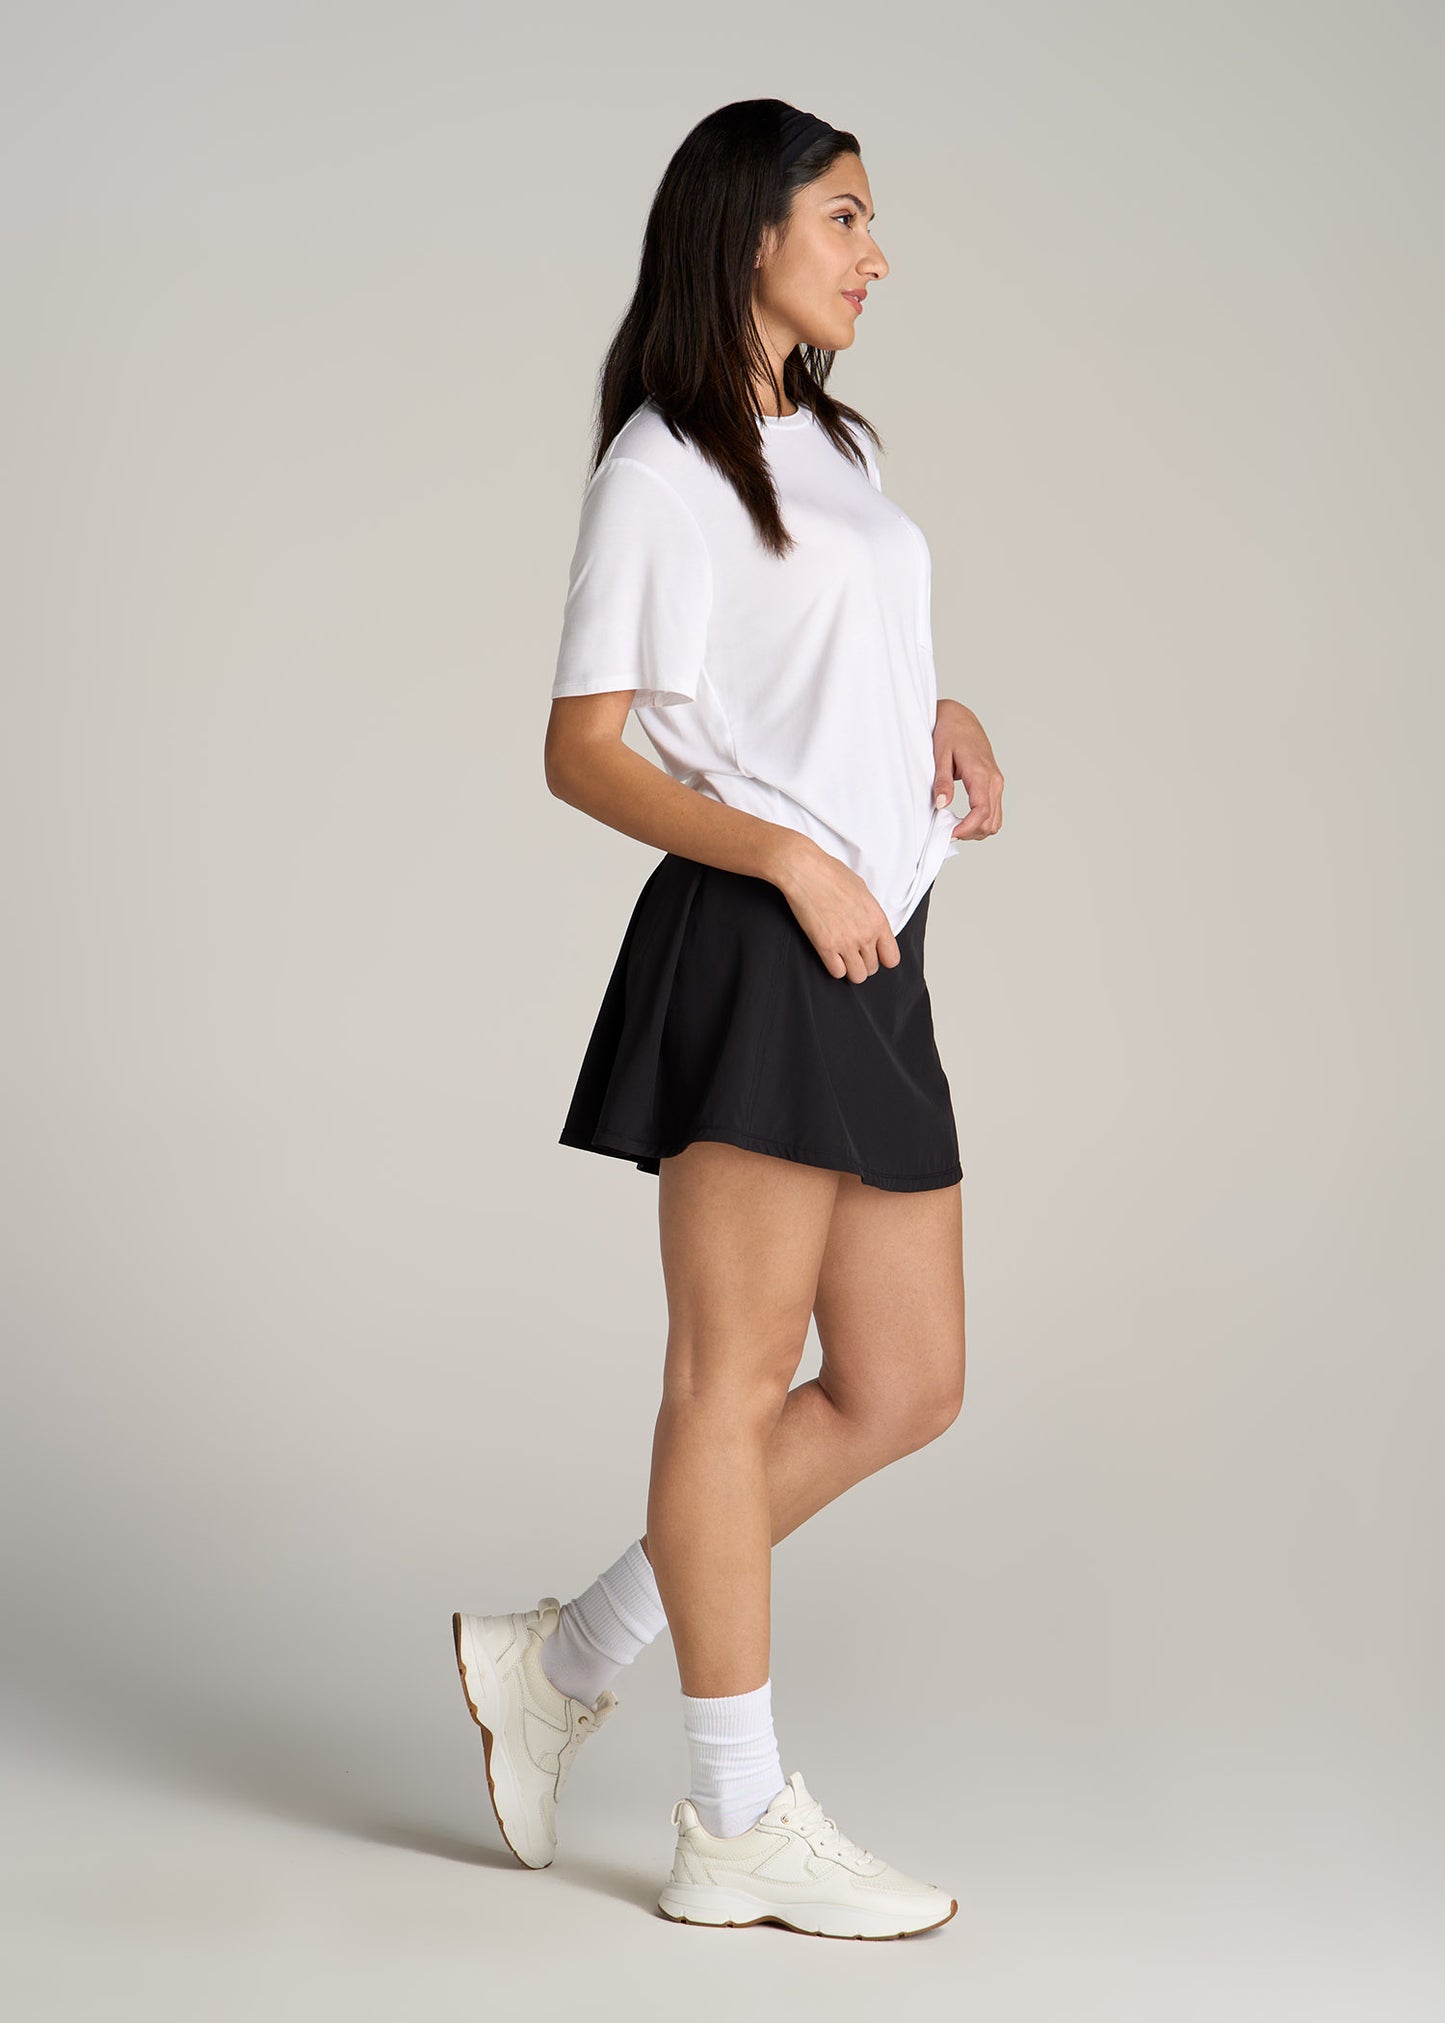 A tall woman wearing American Tall's Crewneck Pocket Tee in White and Athletic Skort in Black.